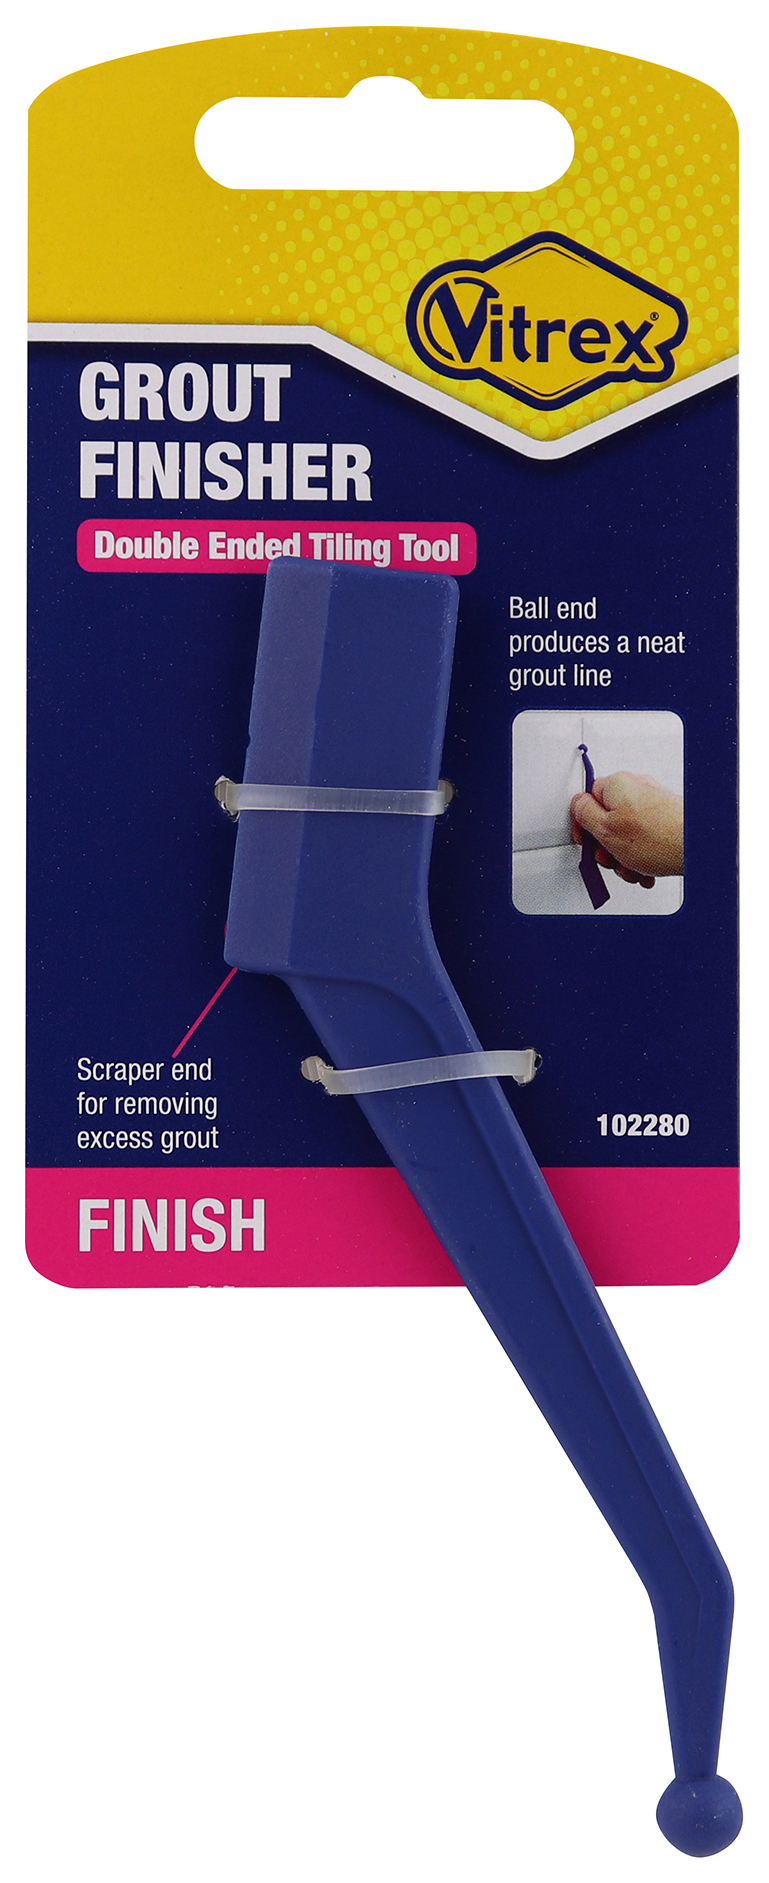 Image of Vitrex Grout Finisher